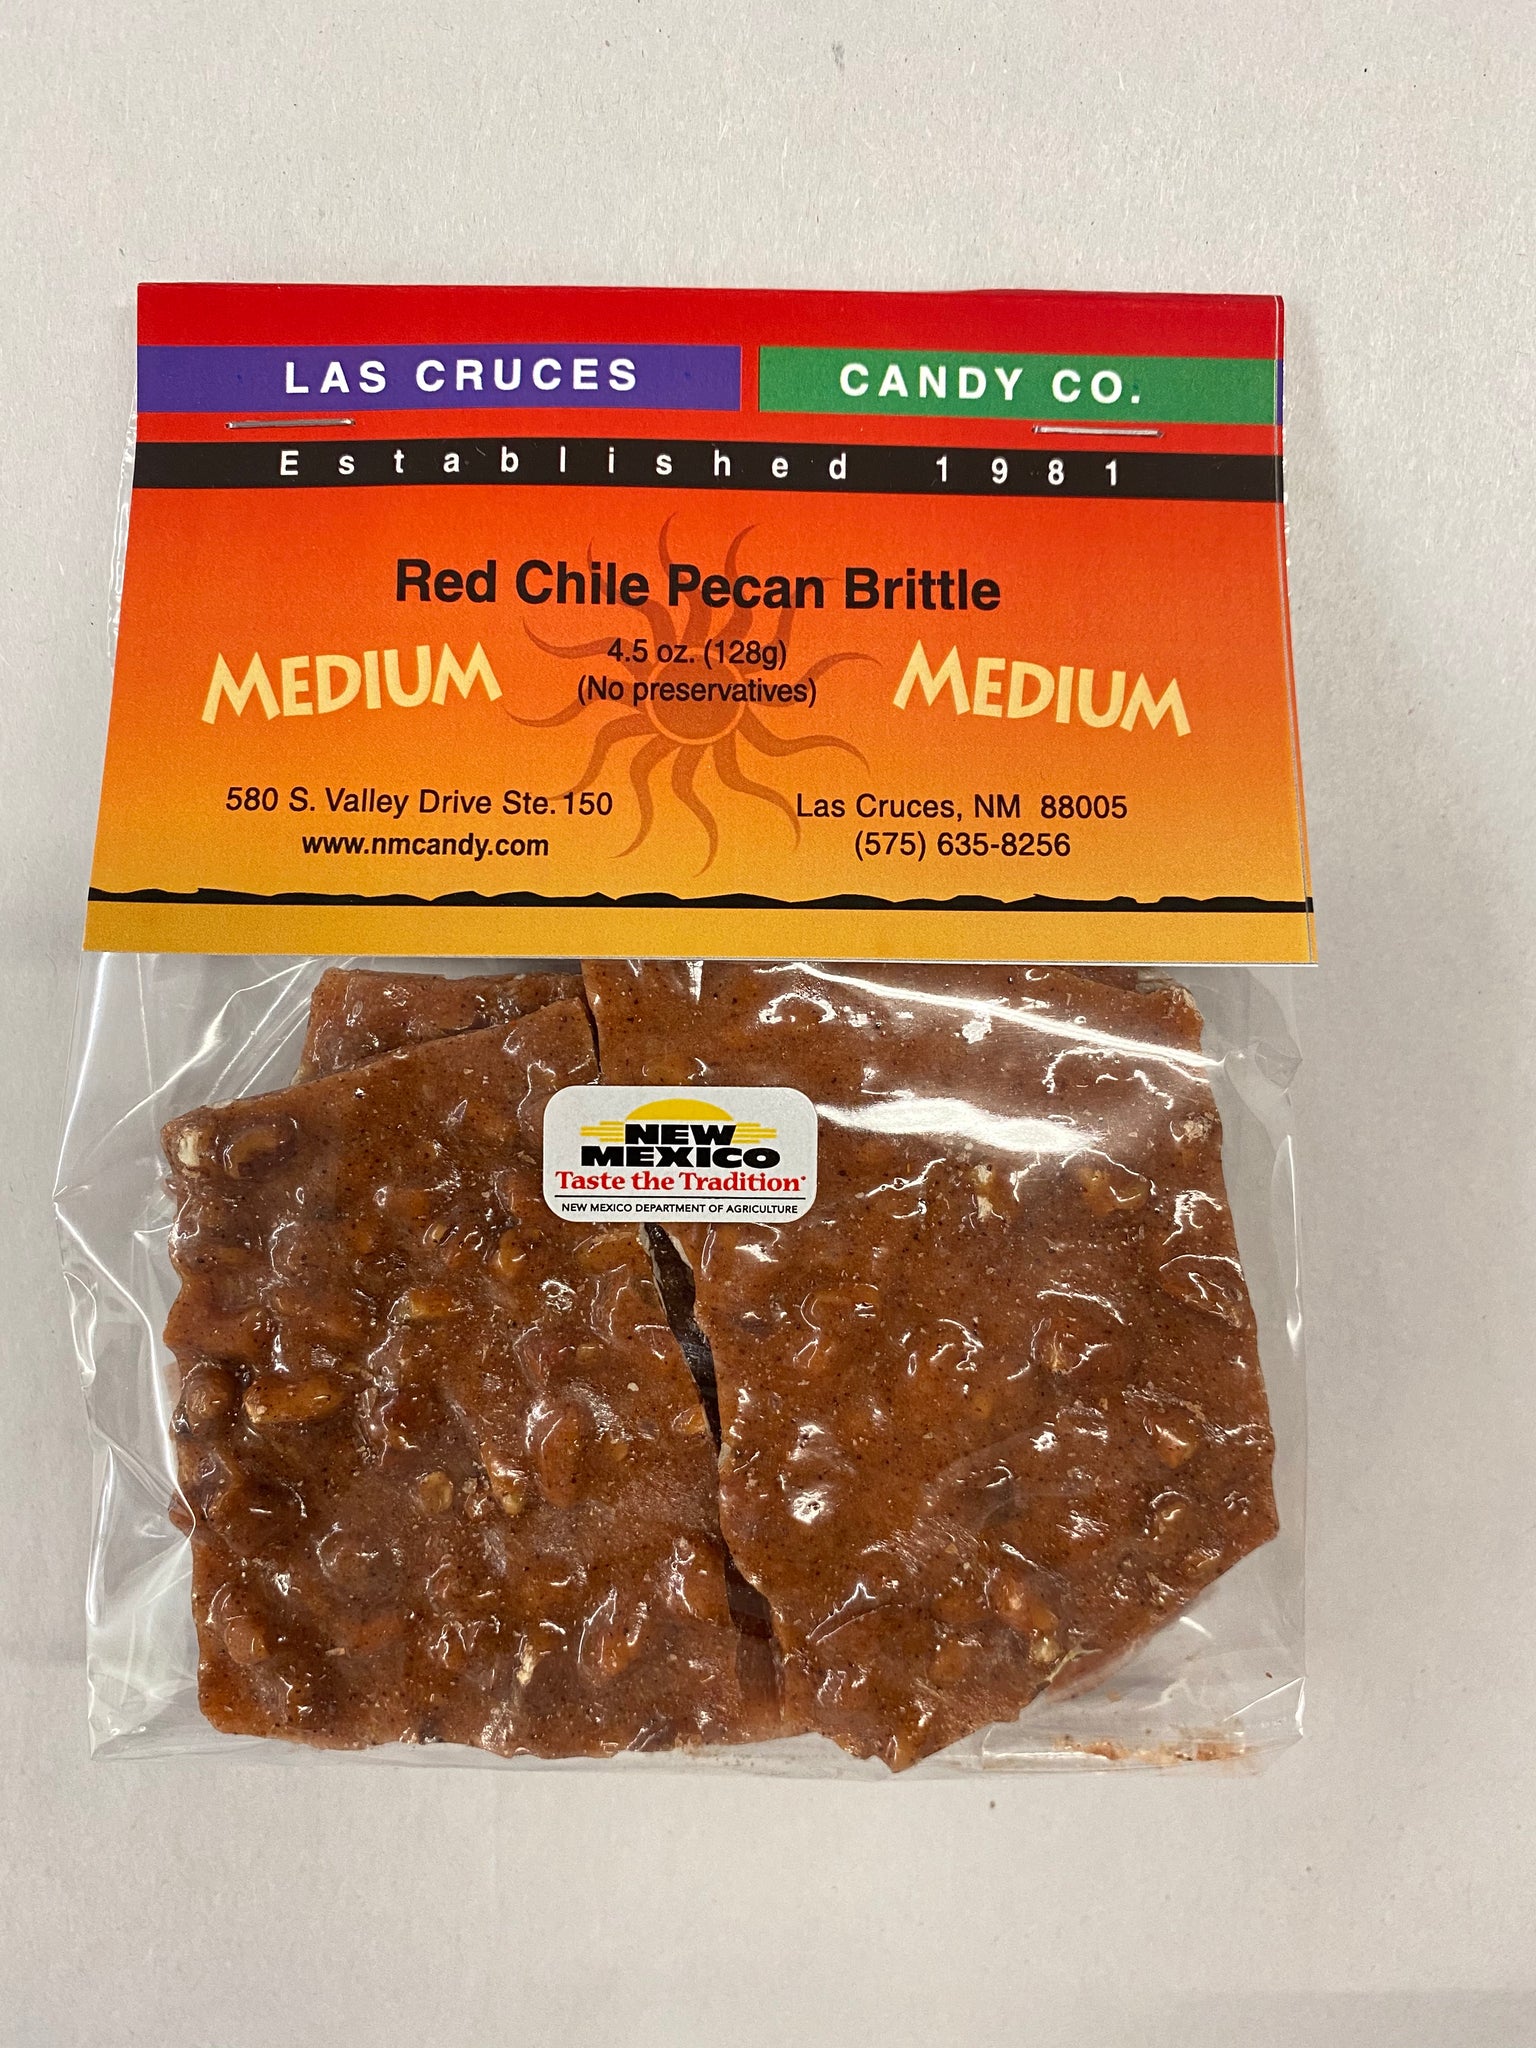 Red Chile Pecan Brittle